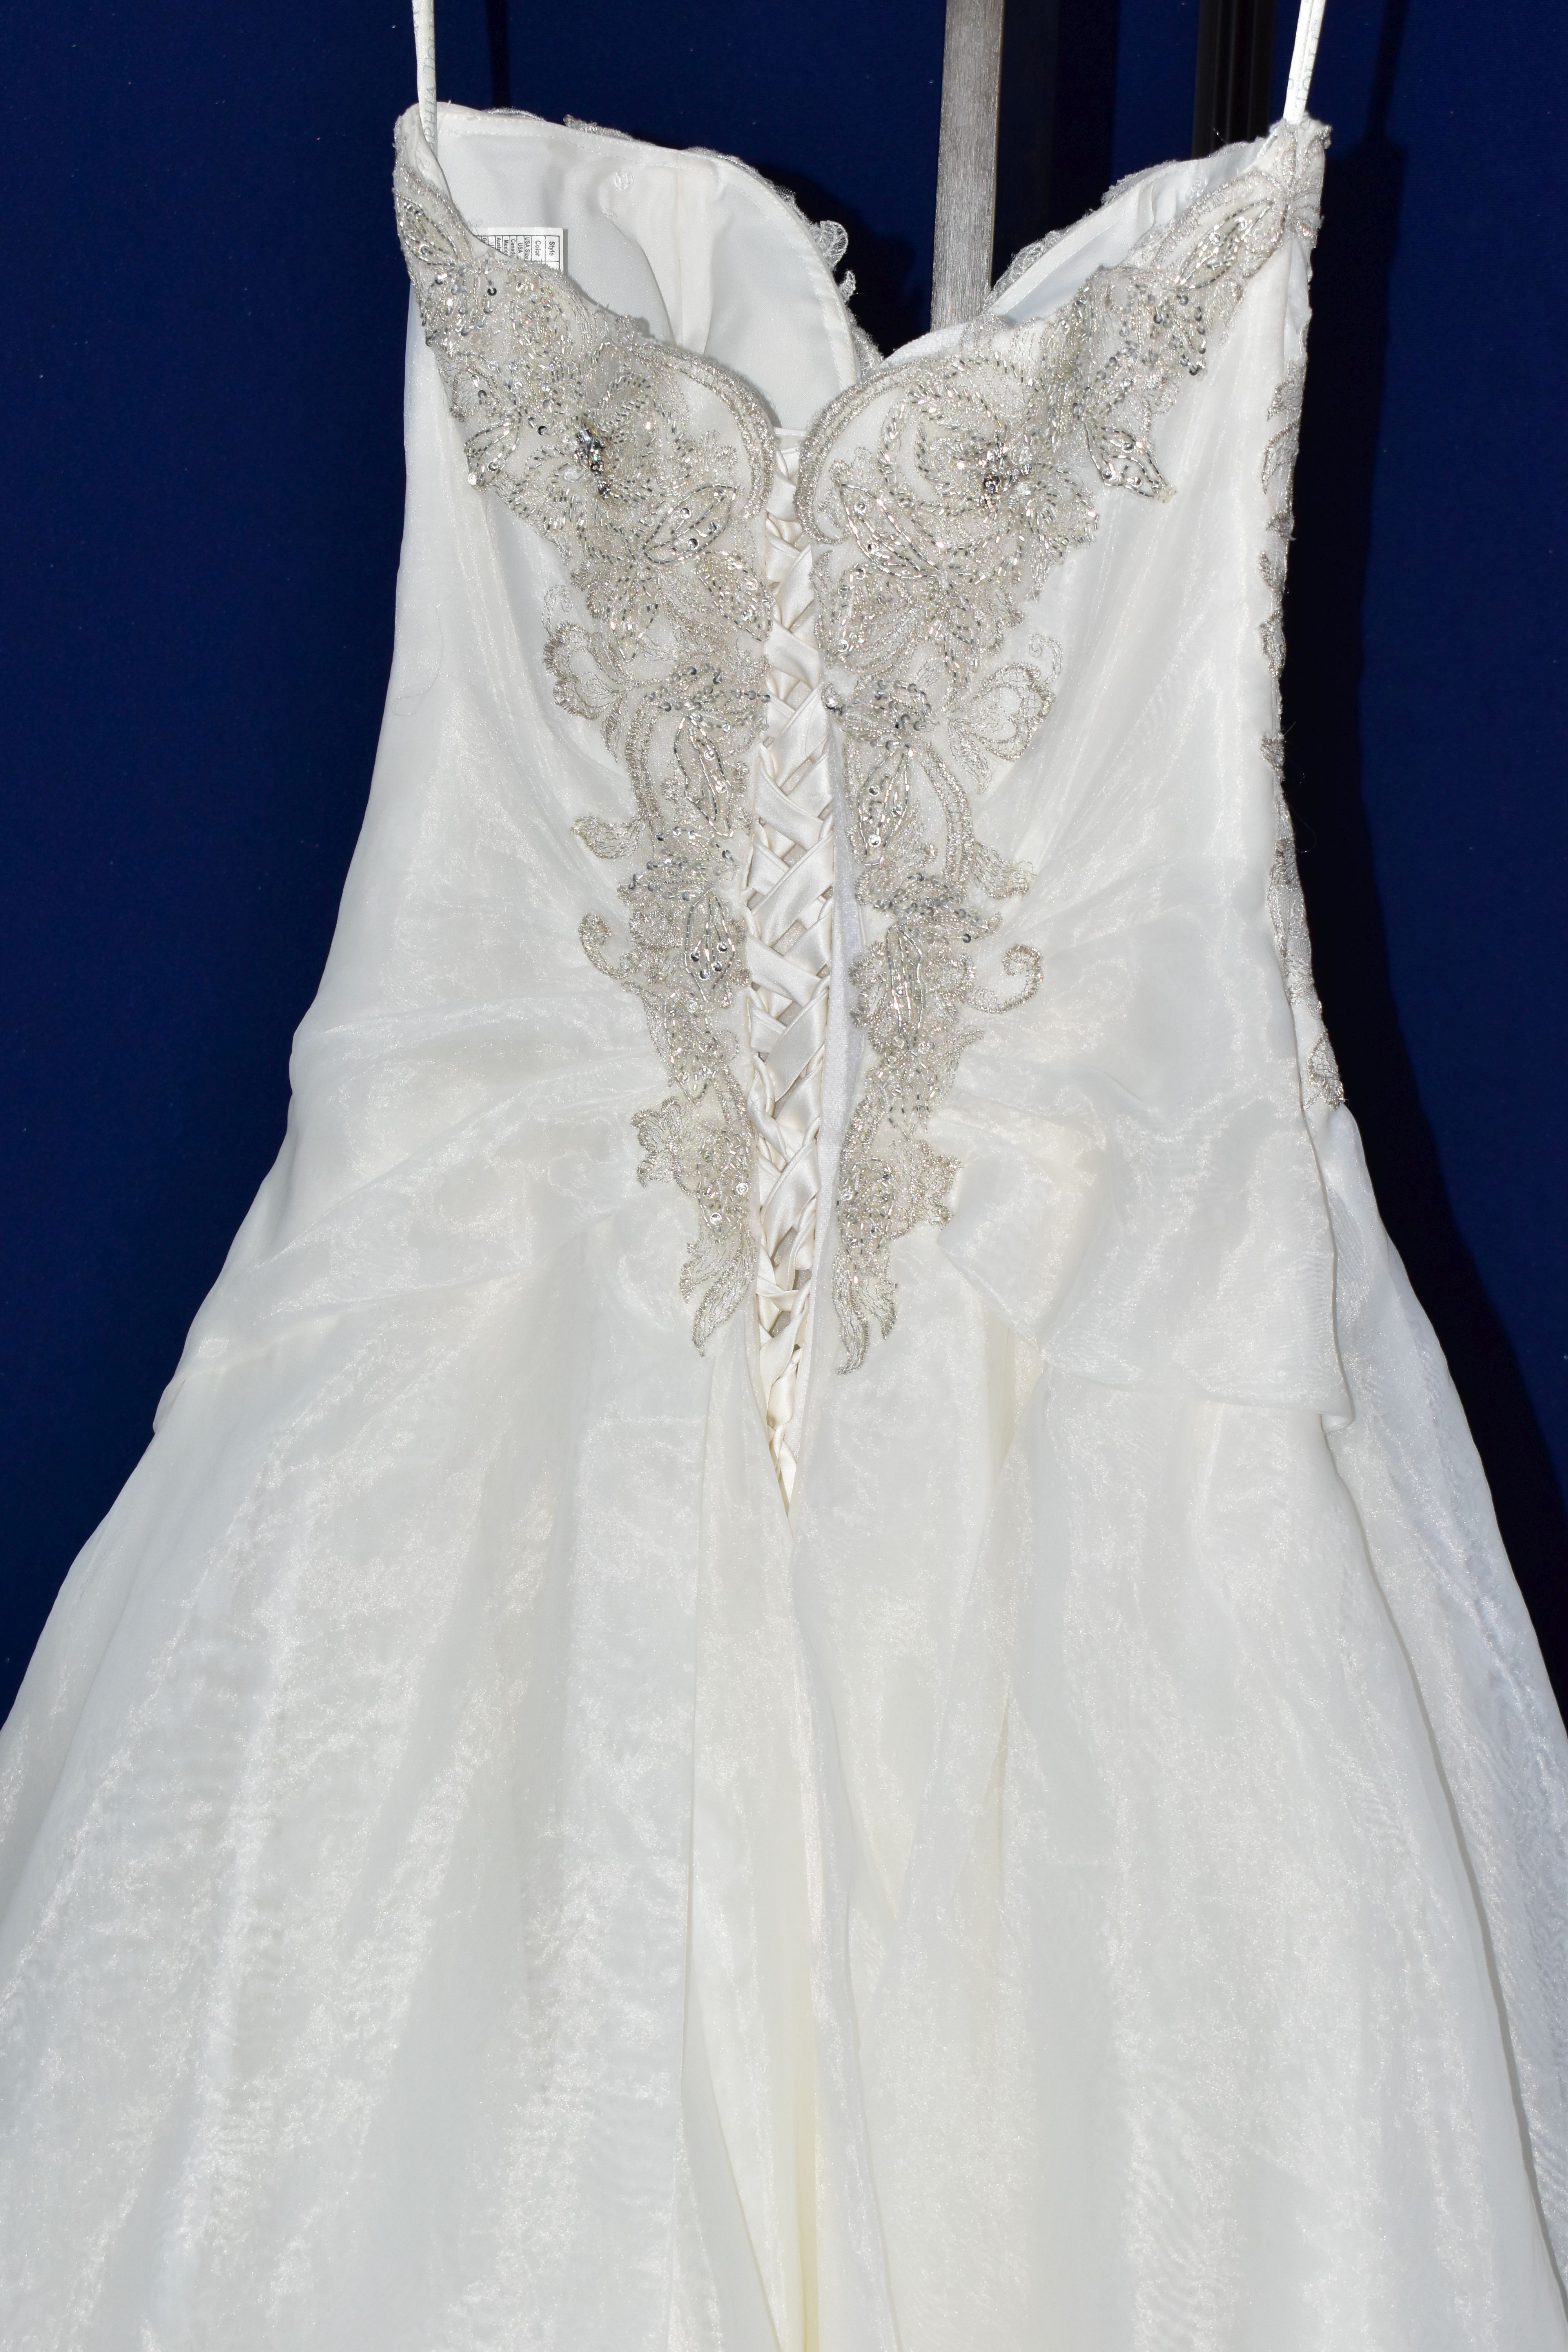 WEDDING DRESS, size 6, long train, pewter accent beaded appliques, strapping detail in the back, - Image 9 of 10